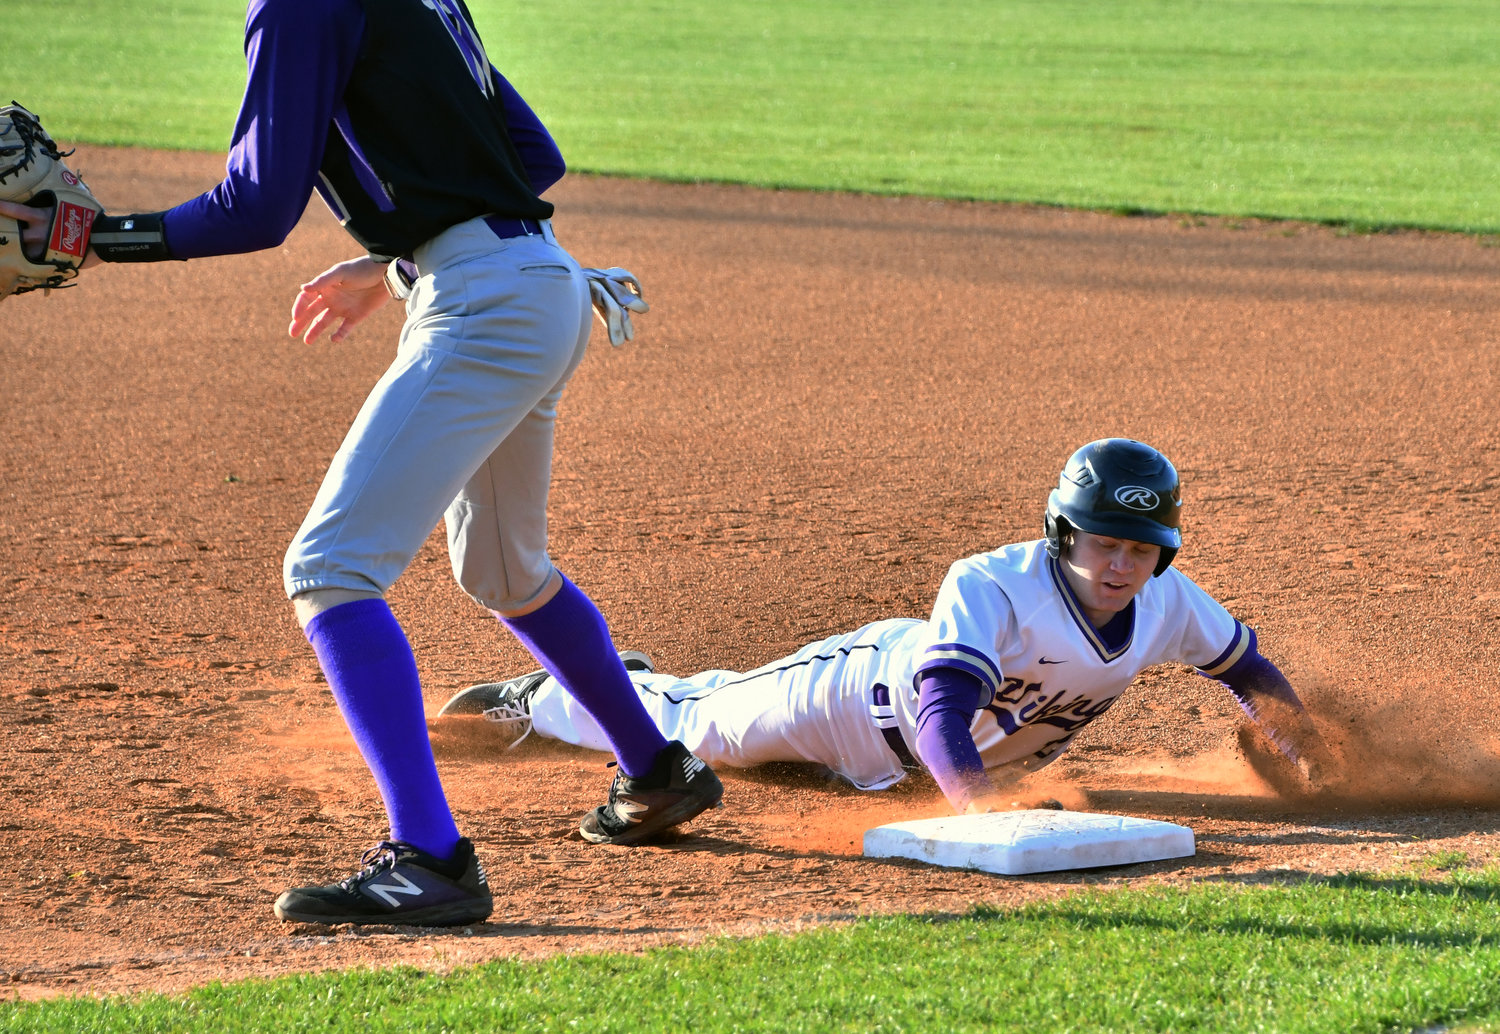 Corey Paterick of the Vikings dives back to first in the opening inning. Paterick was the winning pitcher and struck out five over three innings of work.